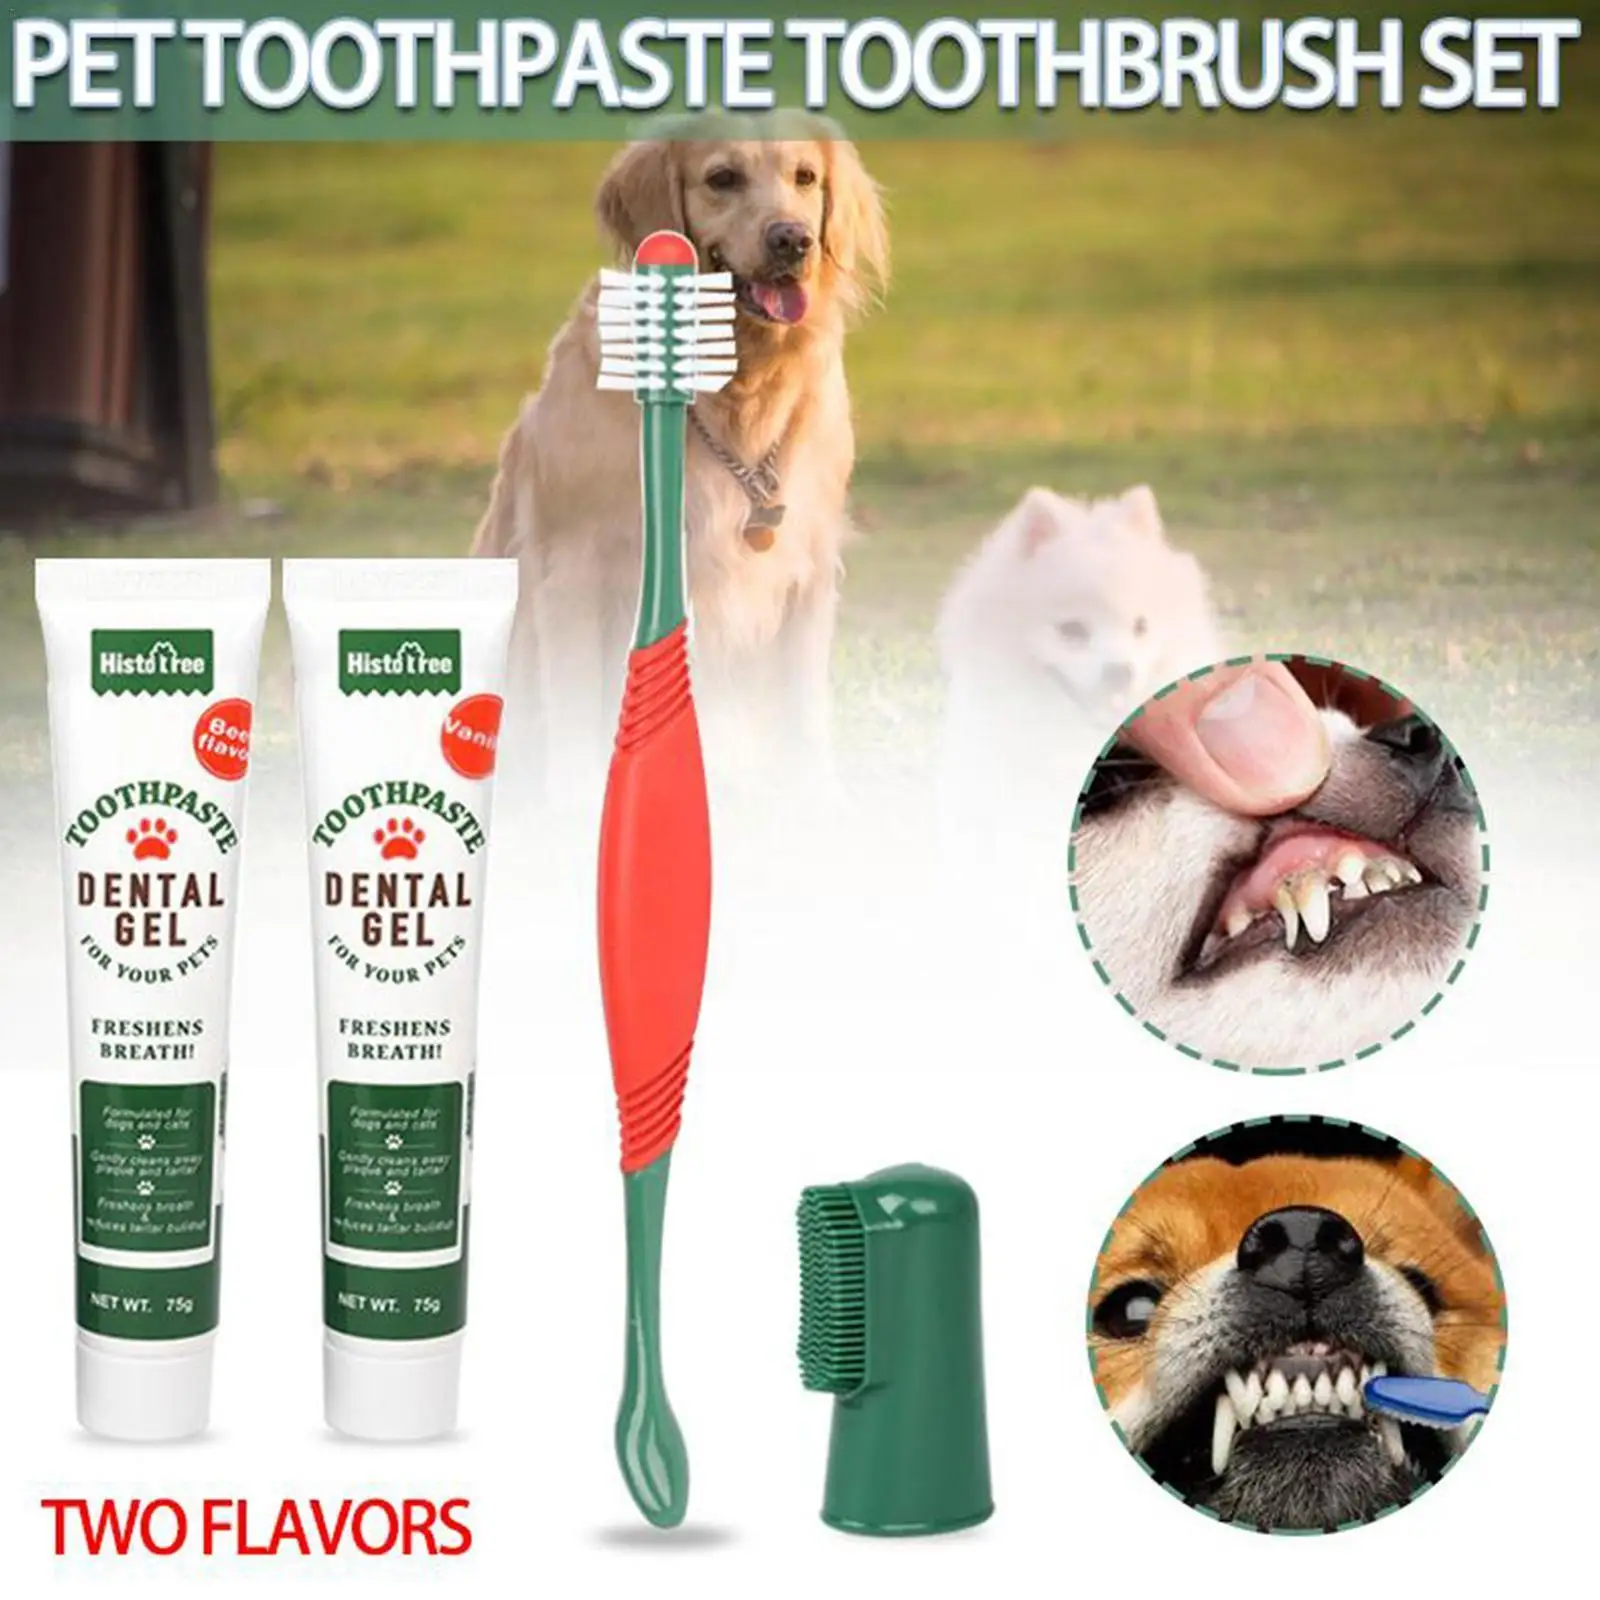 

Pet Tartar Control Kit Contains Toothpaste Toothbrush And Finger Brush For Dogs Dog Teeth Cleaning Kit, Pet Dental Care L0k5